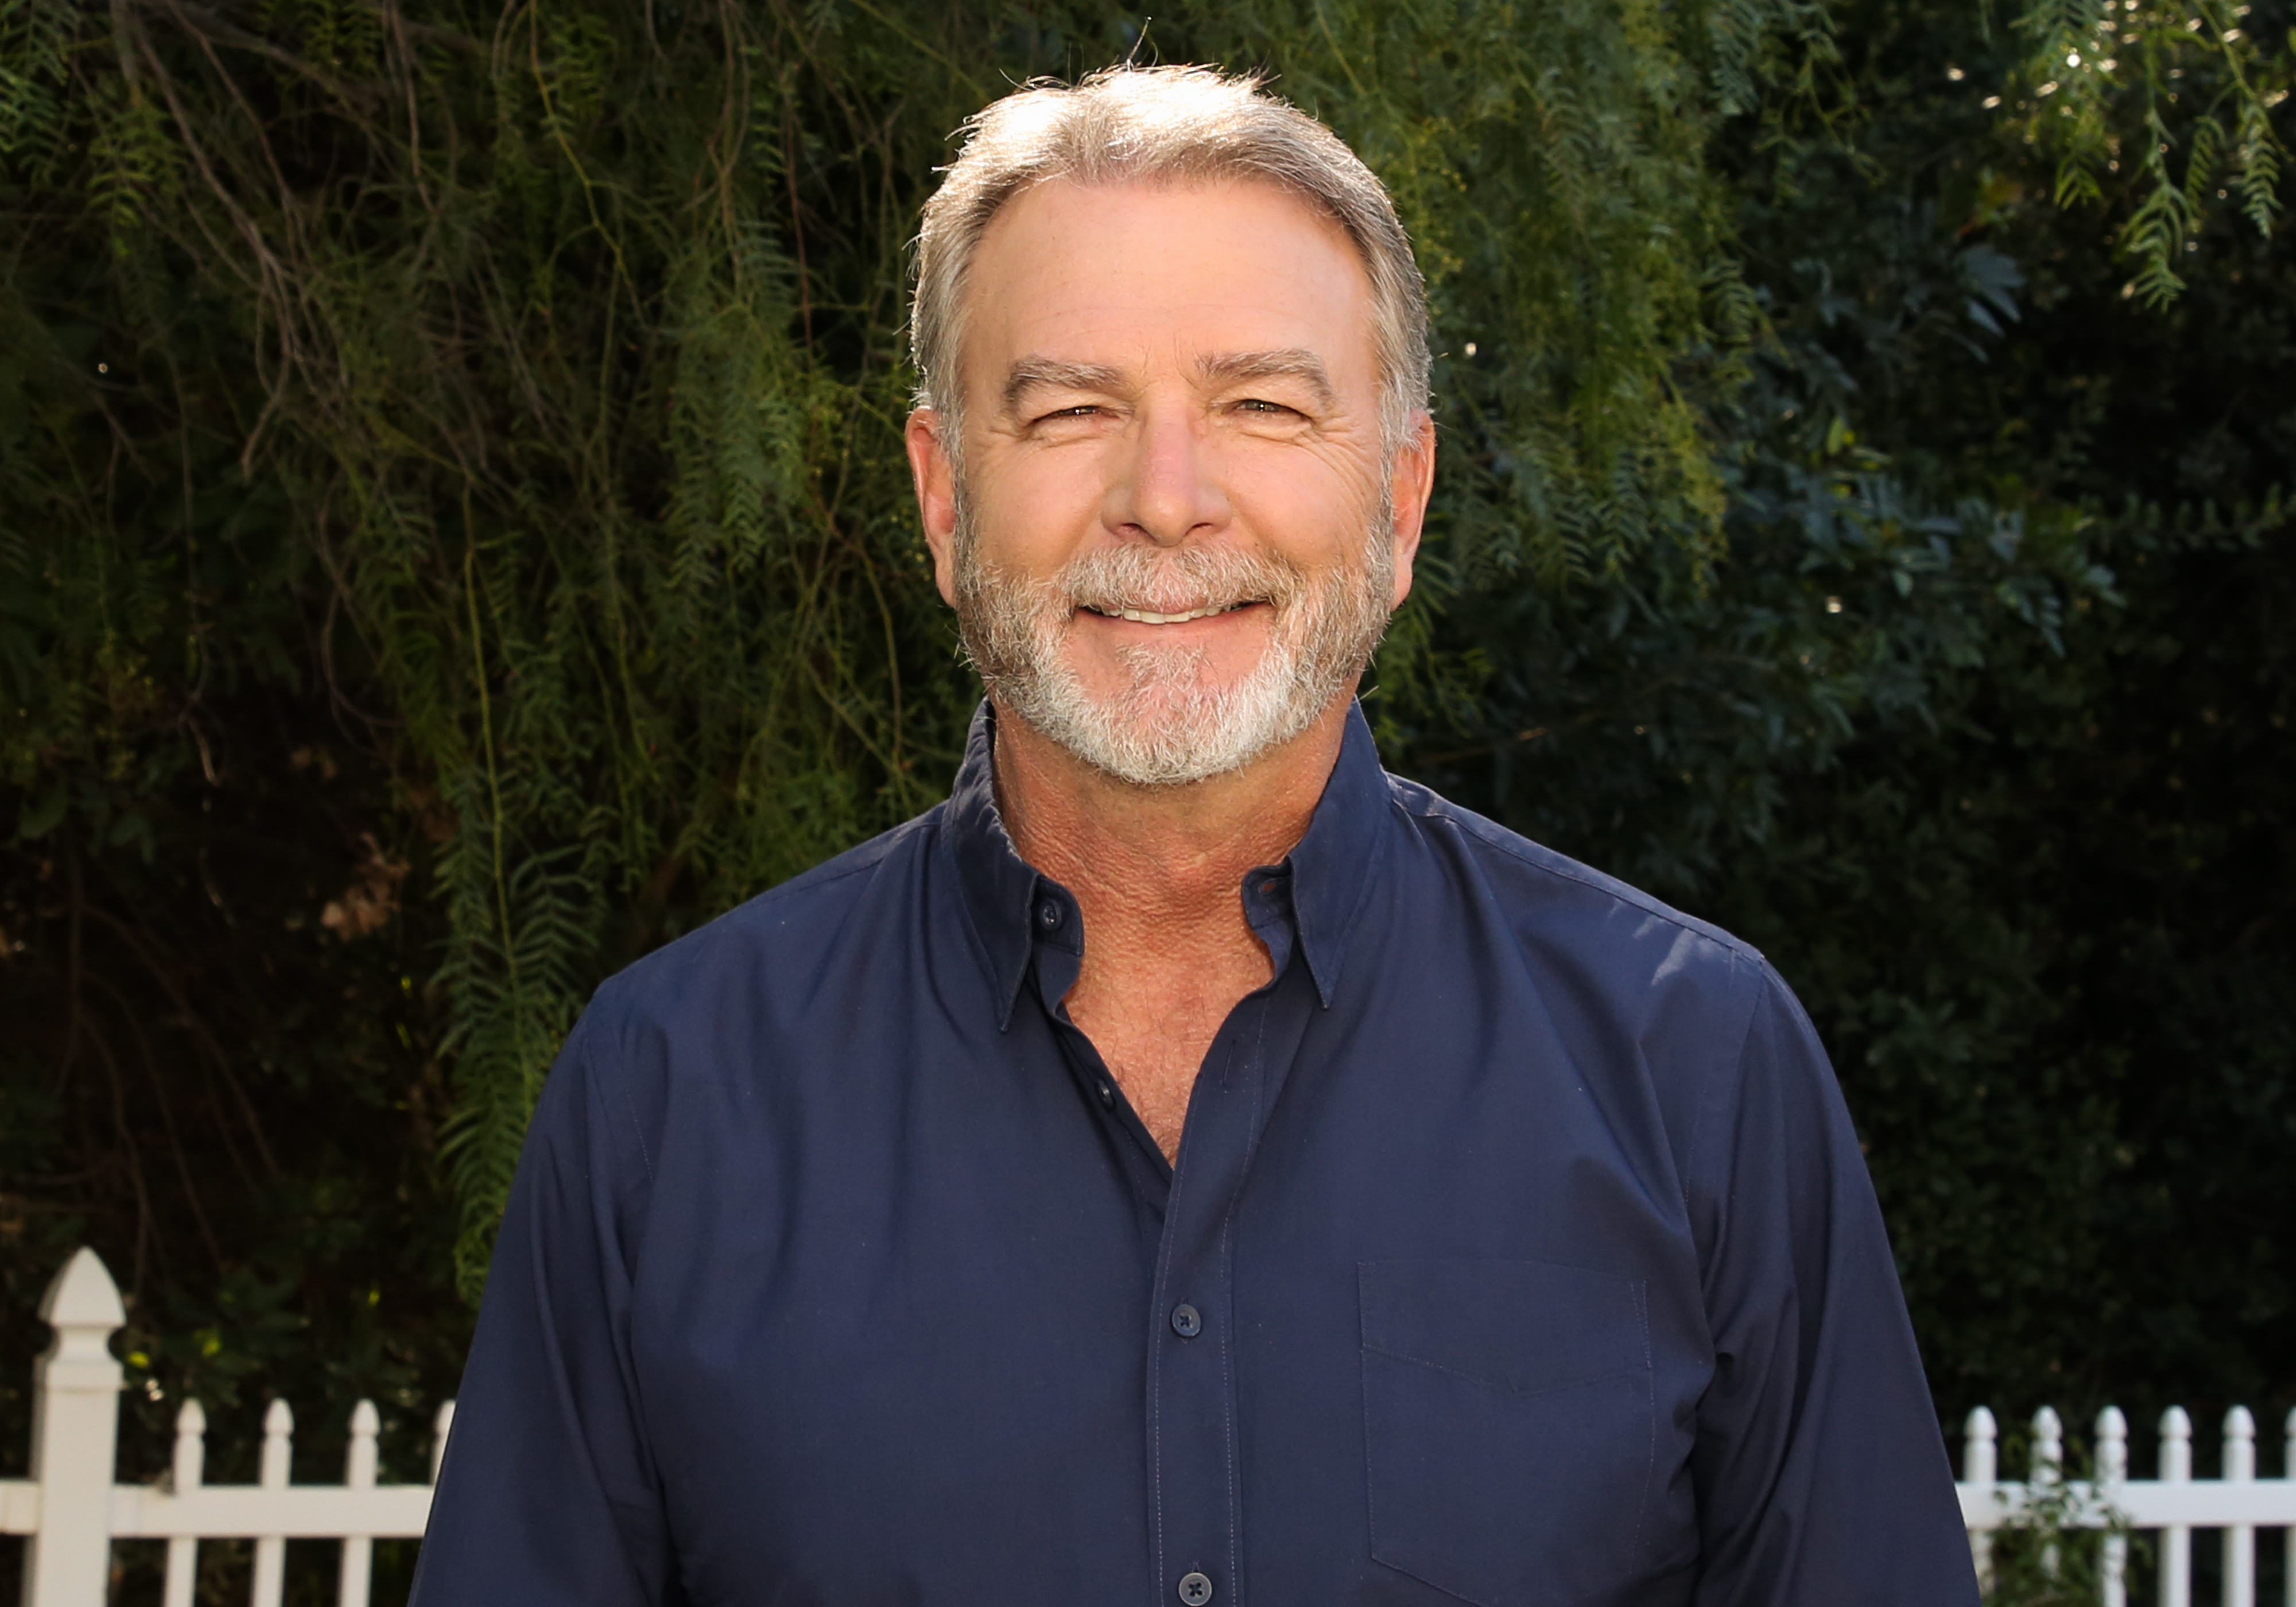 Bill Engvall in Universal City, California